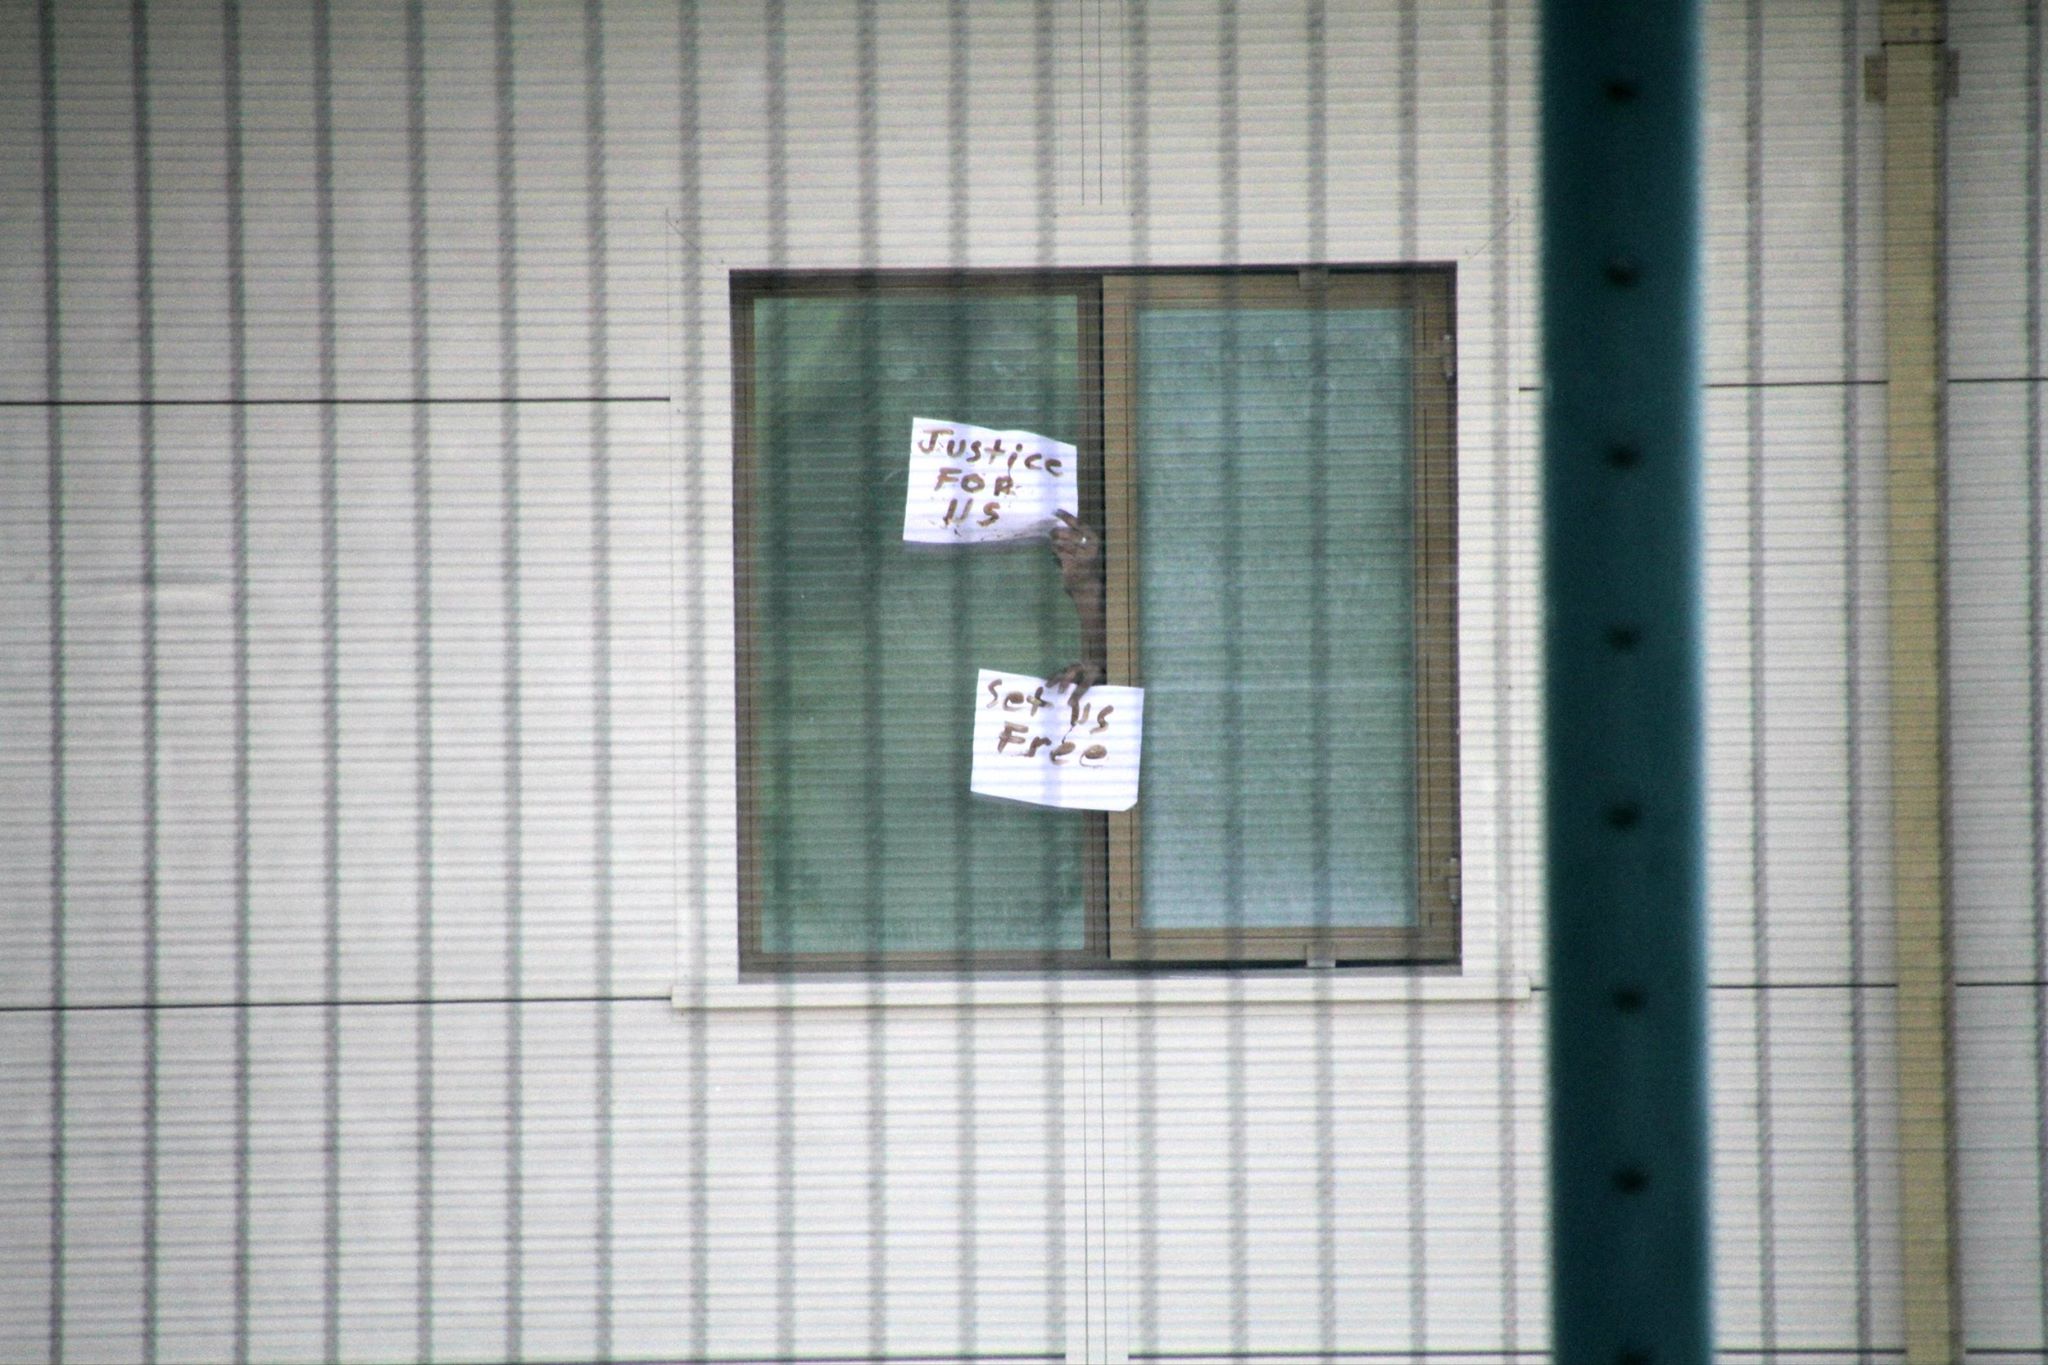 two hands coming out of a window of an immigration detention centre holding up pieces of paper with the words 'justice for us' 'set us free' written on it